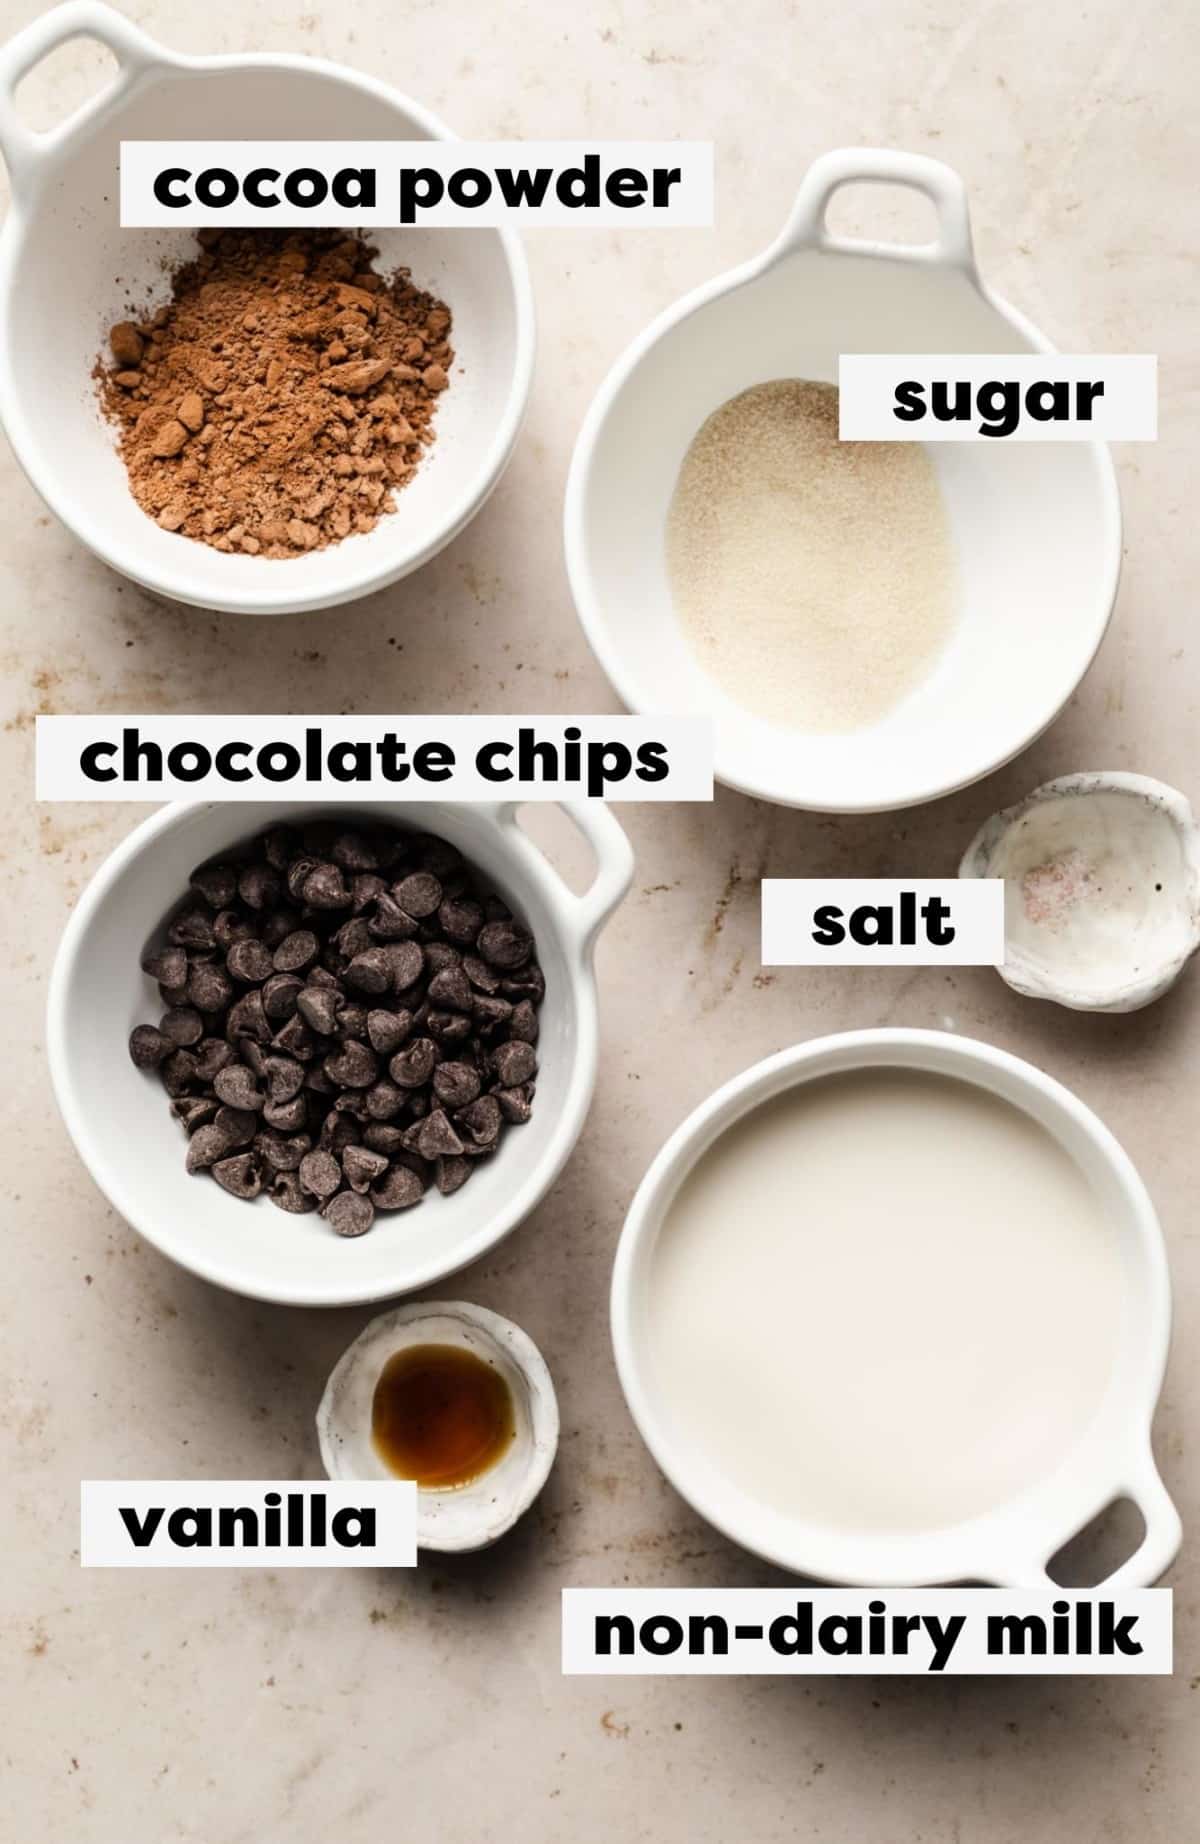 ingredients for making vegan hot chocolate with labels for ingredients.